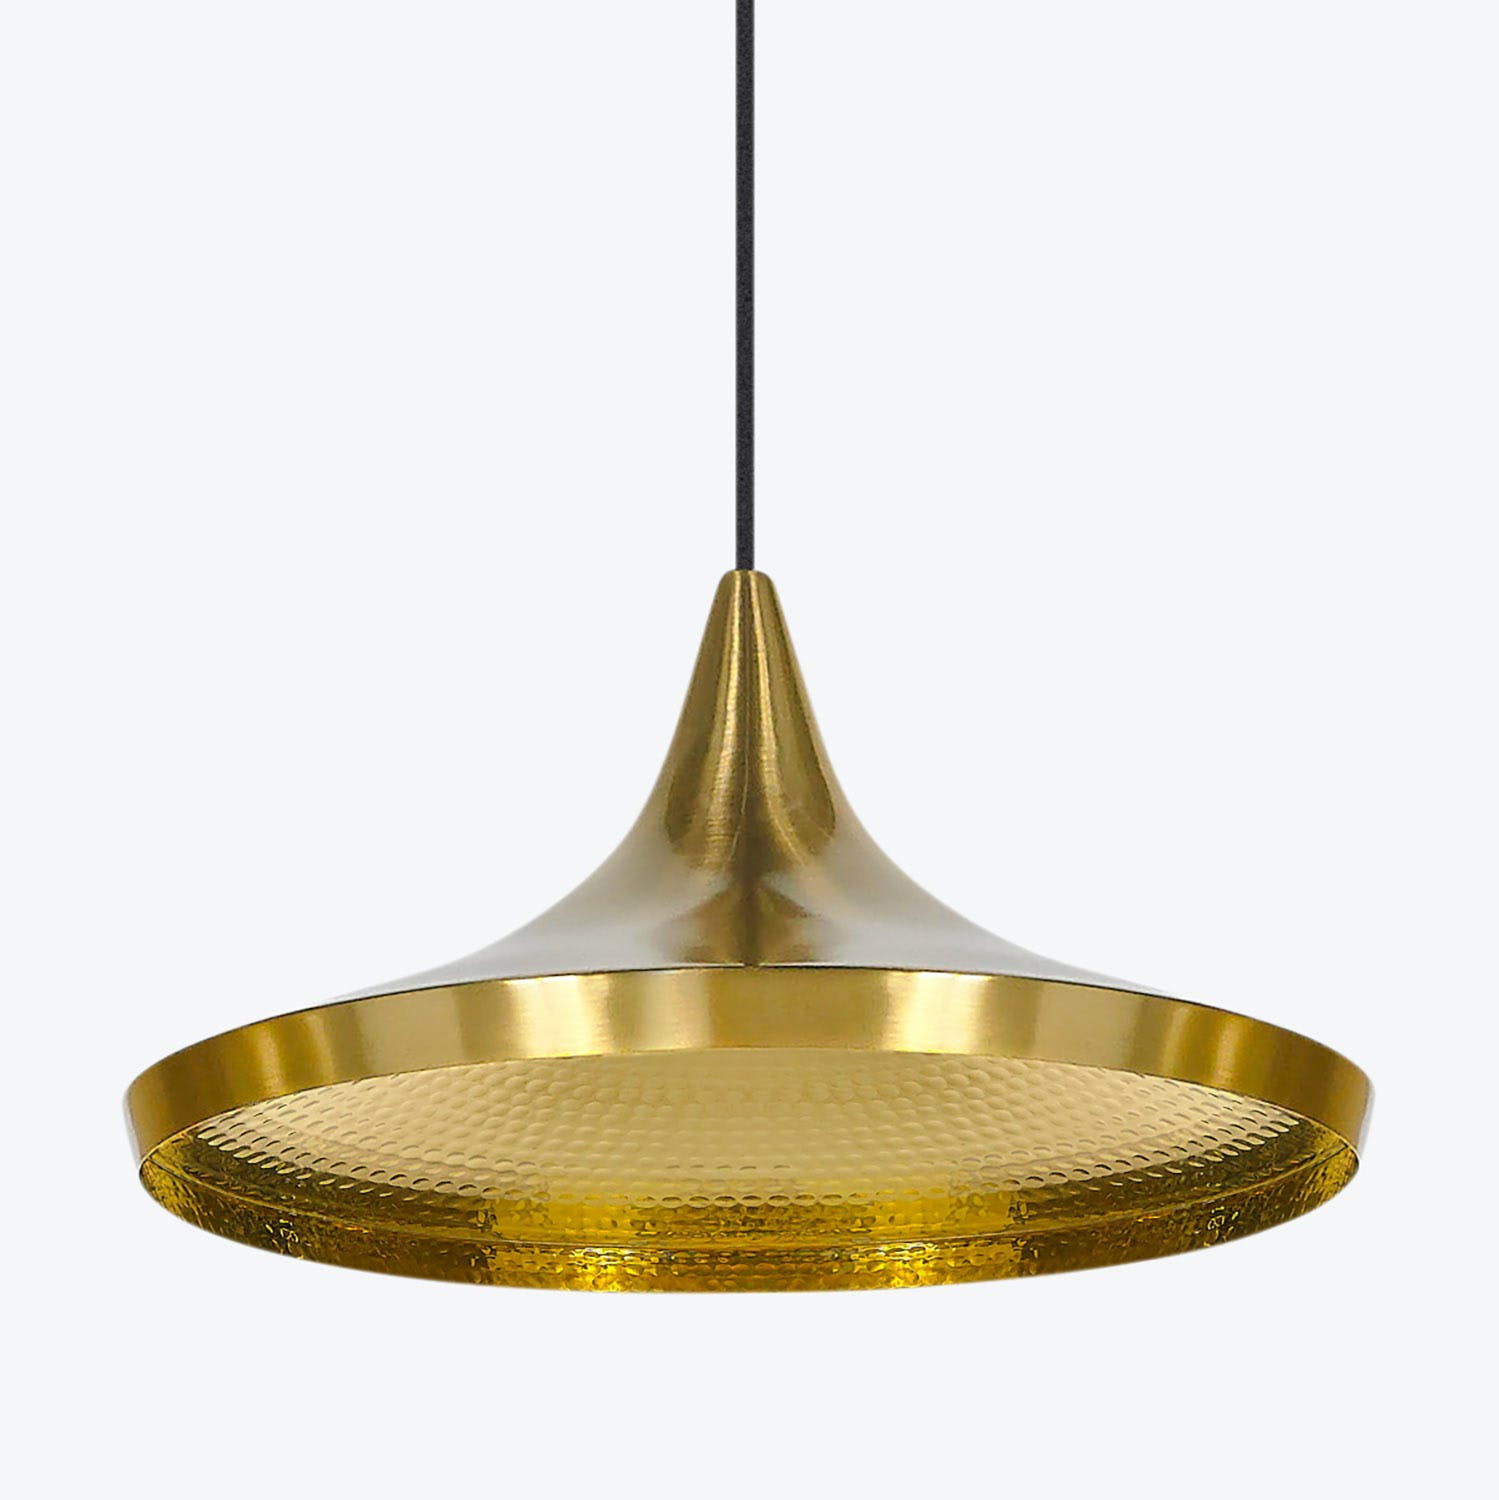 A modern pendant light with a sleek design and gold finish.